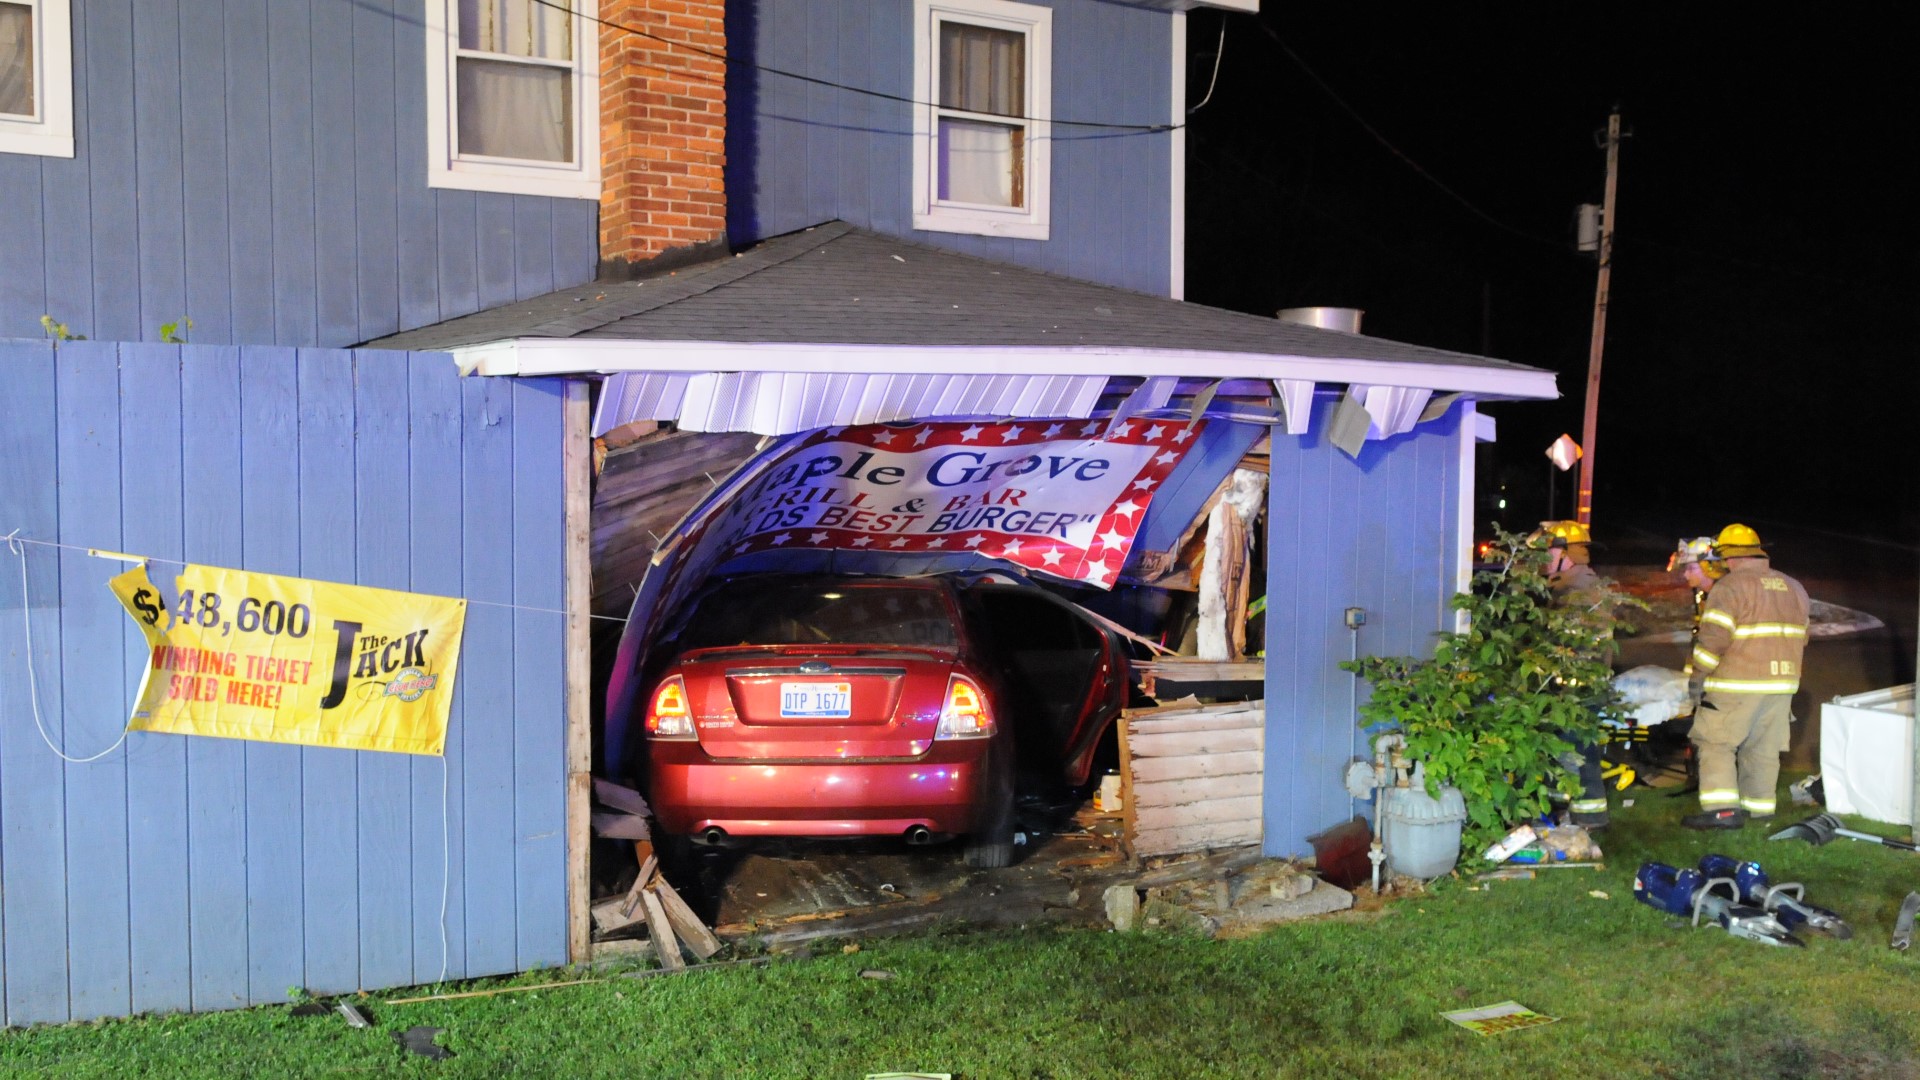 One man was hospitalized after crashing into a South Haven restaurant Sunday night. The driver struck a traffic island at a roundabout intersection, went air-borne and struck the Maple Grove Bar & Grill. The restaurant was closed at the time of the accident, however, employees and the owner were still in the building.